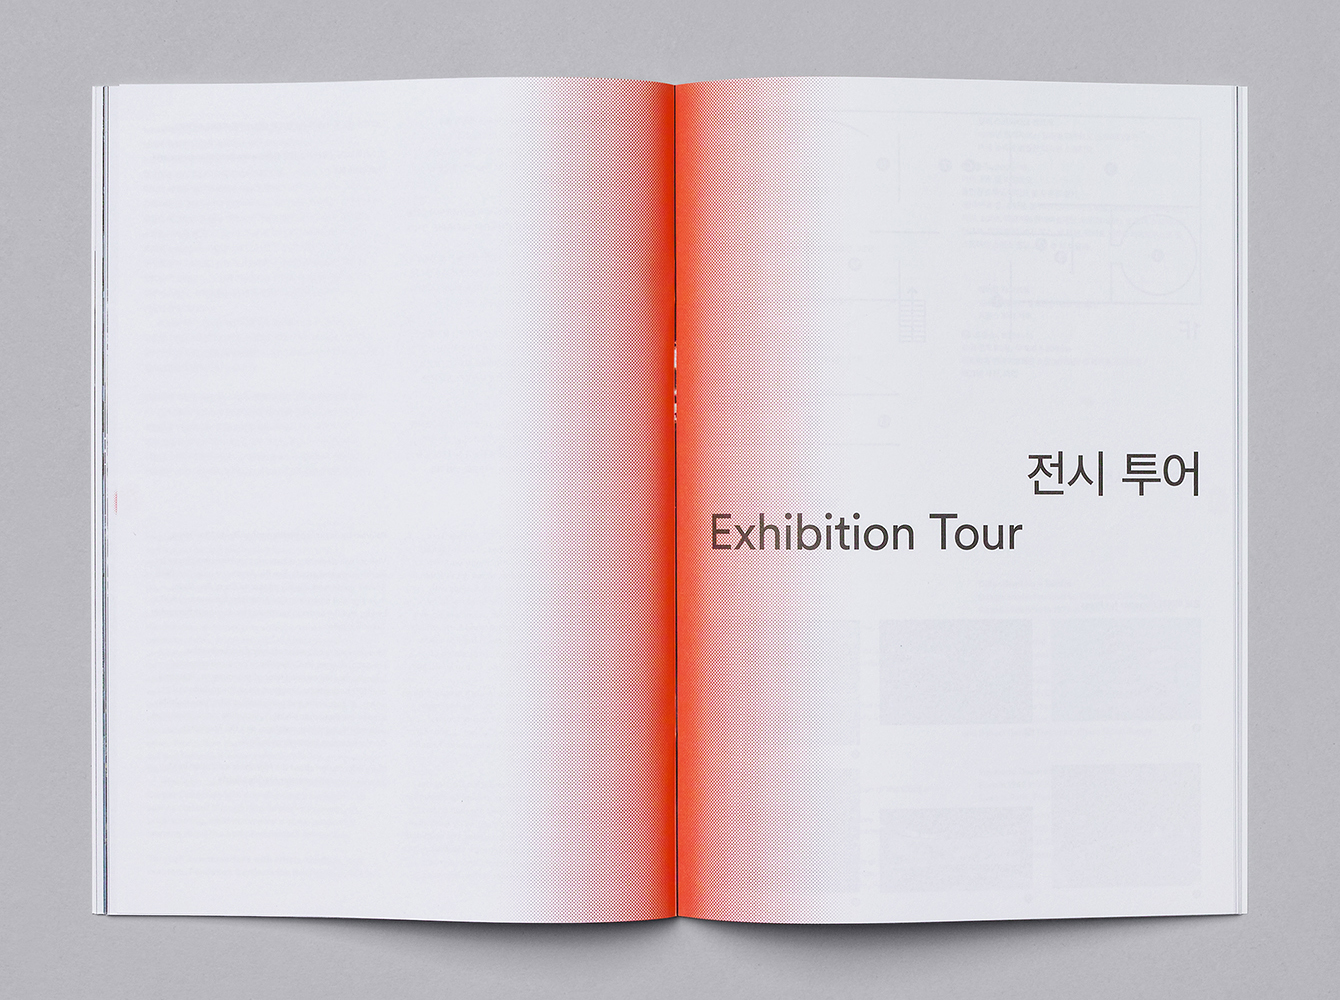 Visual identity and guide book by Studio fnt for South Korean art exhibition Highlights at SeMA